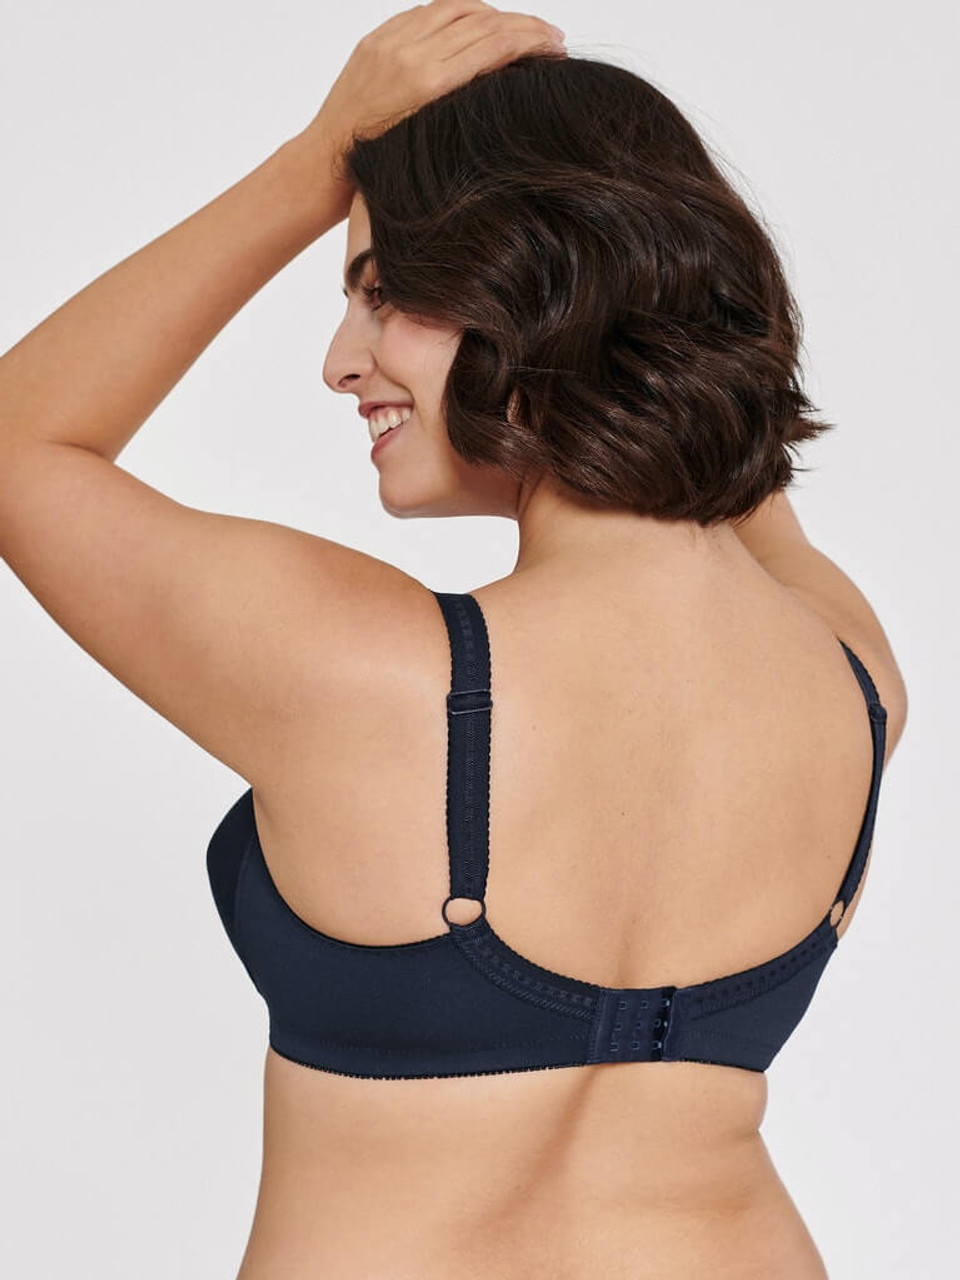 Naturana Cotton Wireless Moulded Bra With Comfort Staps (A–D 36–46) 86020